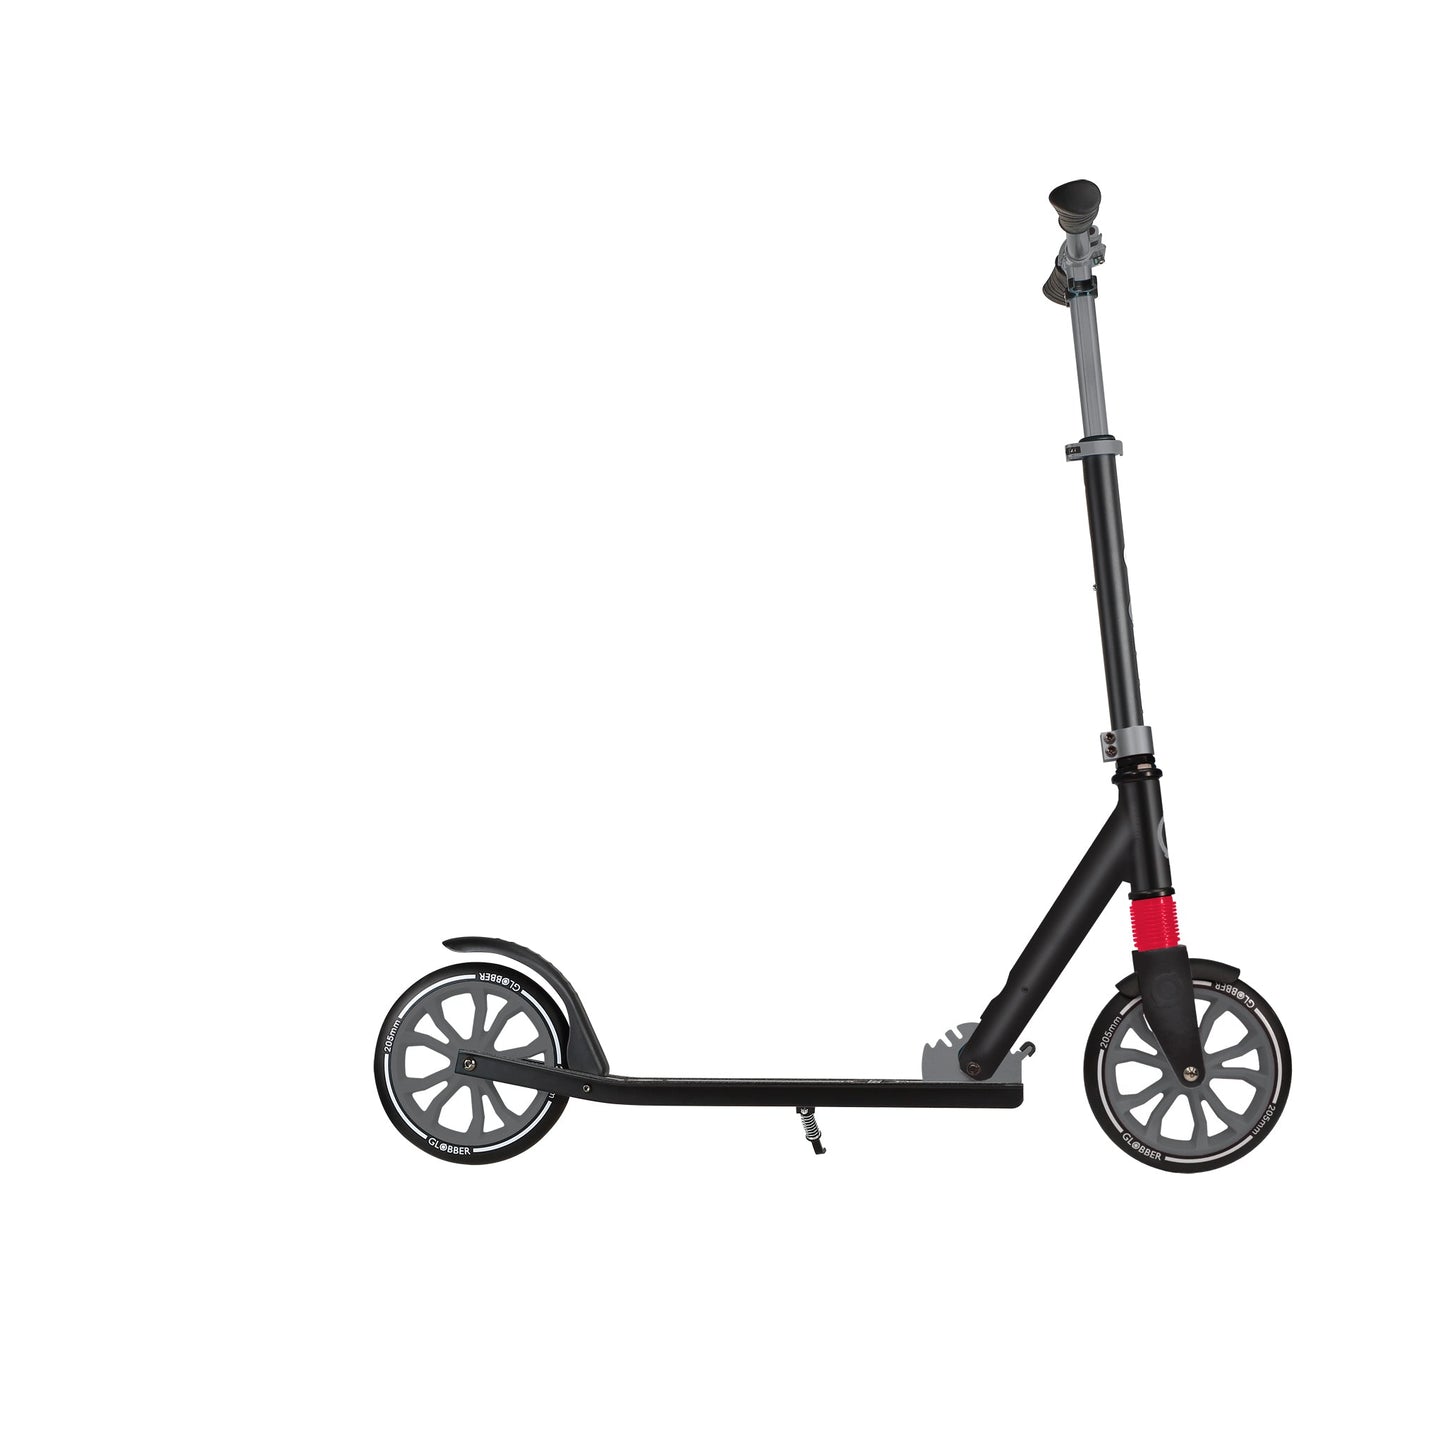 NL 205: Big Wheel Scooter for Kids and Teens - Grey/Black